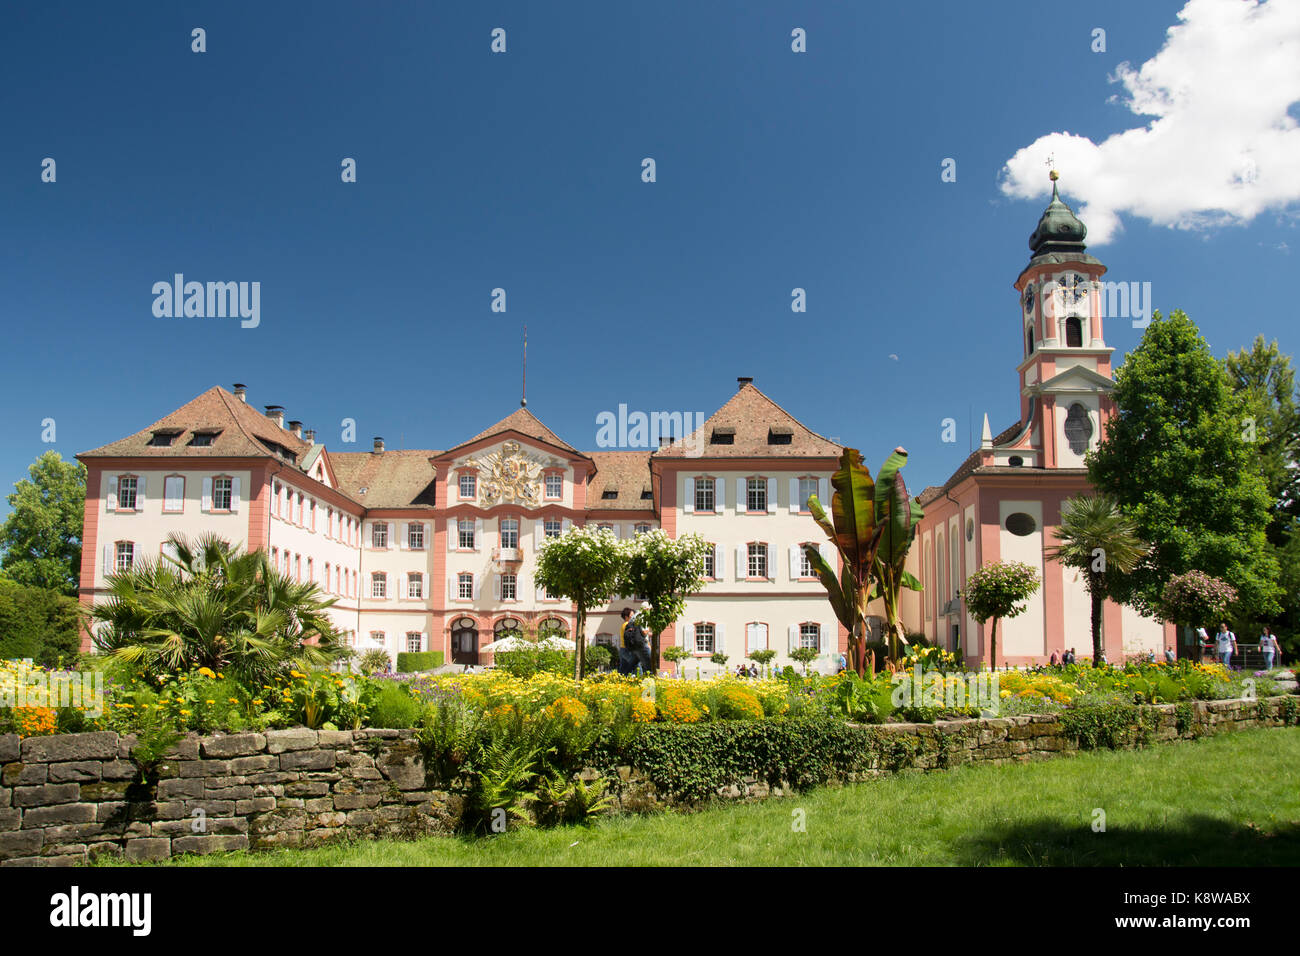 Schloss Mainau within its garden estate on Mainau Island, Lake Constance (Bodensee), southern Germany Stock Photo